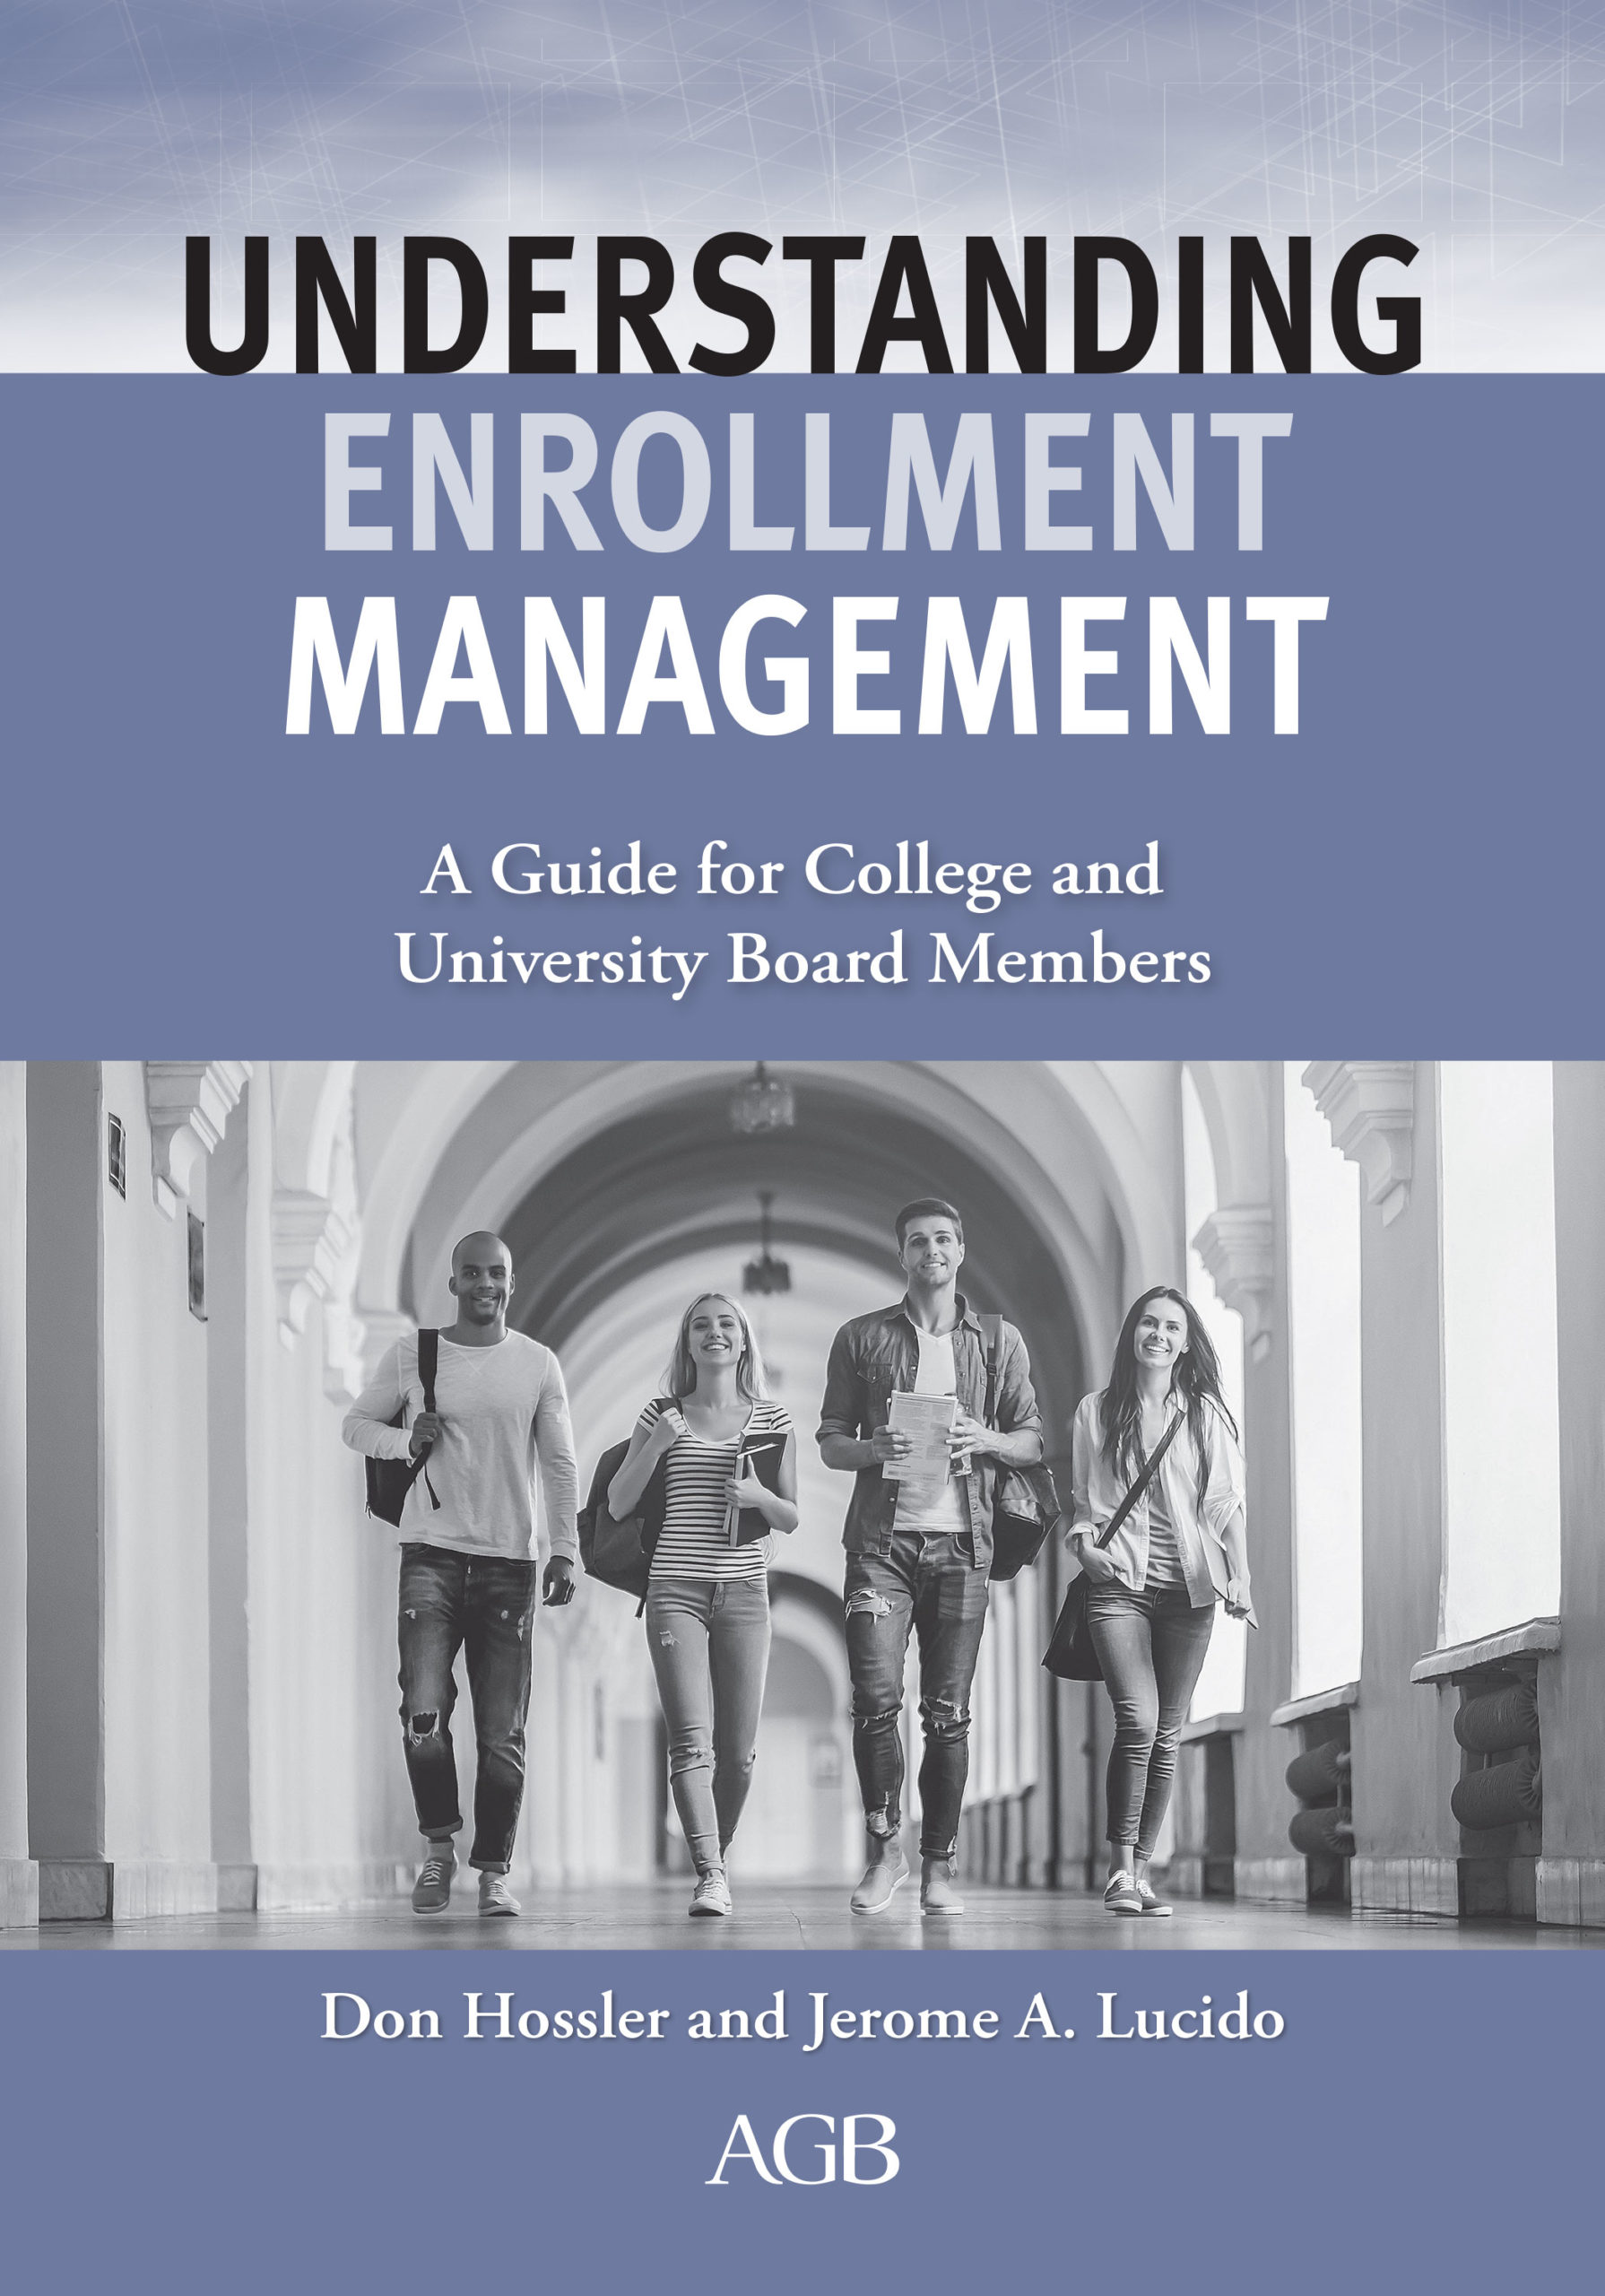 Understanding Enrollment Management: A Guide for College and